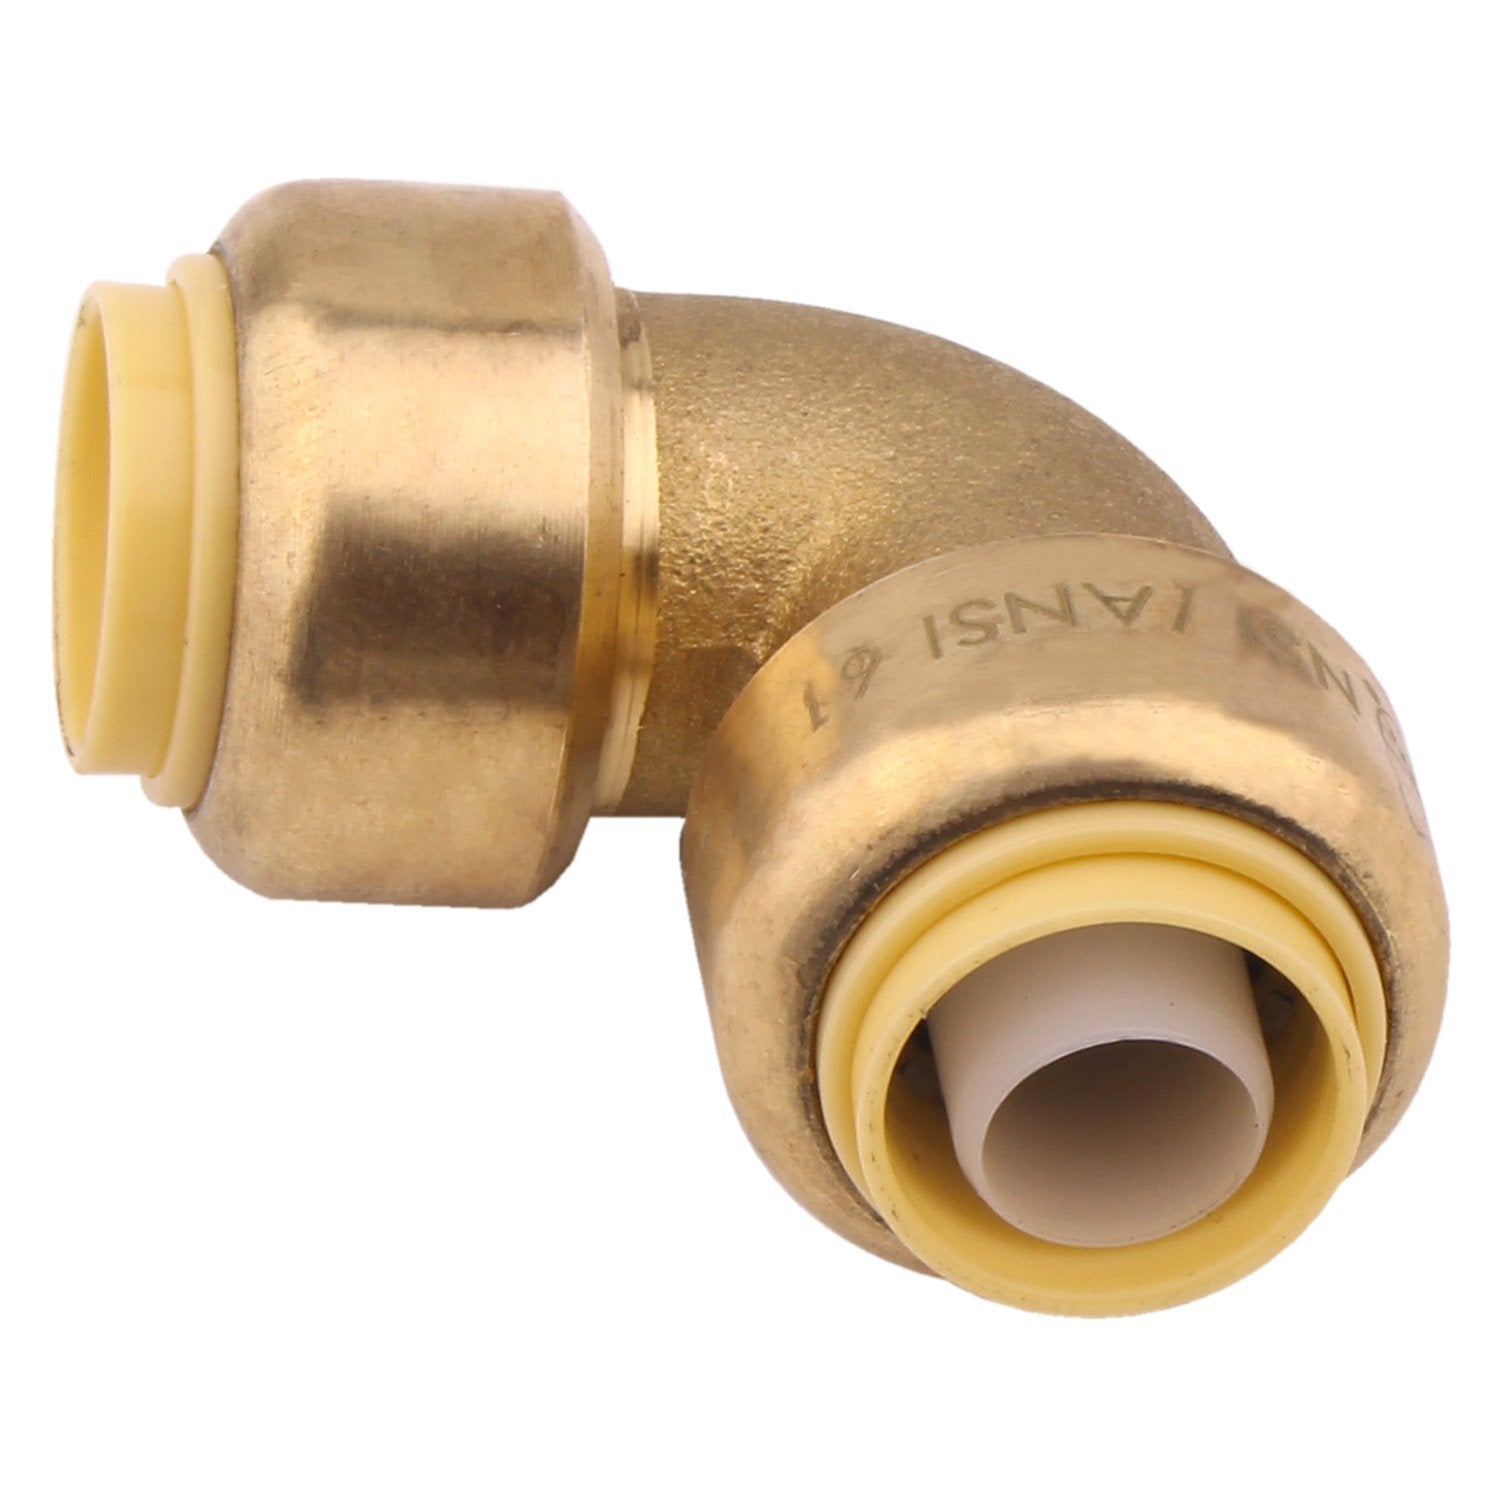 1/2-Inch 90-Degree Elbow,Push-to-Connect Plumbing Fittings with 1/2" Disconnect Clip